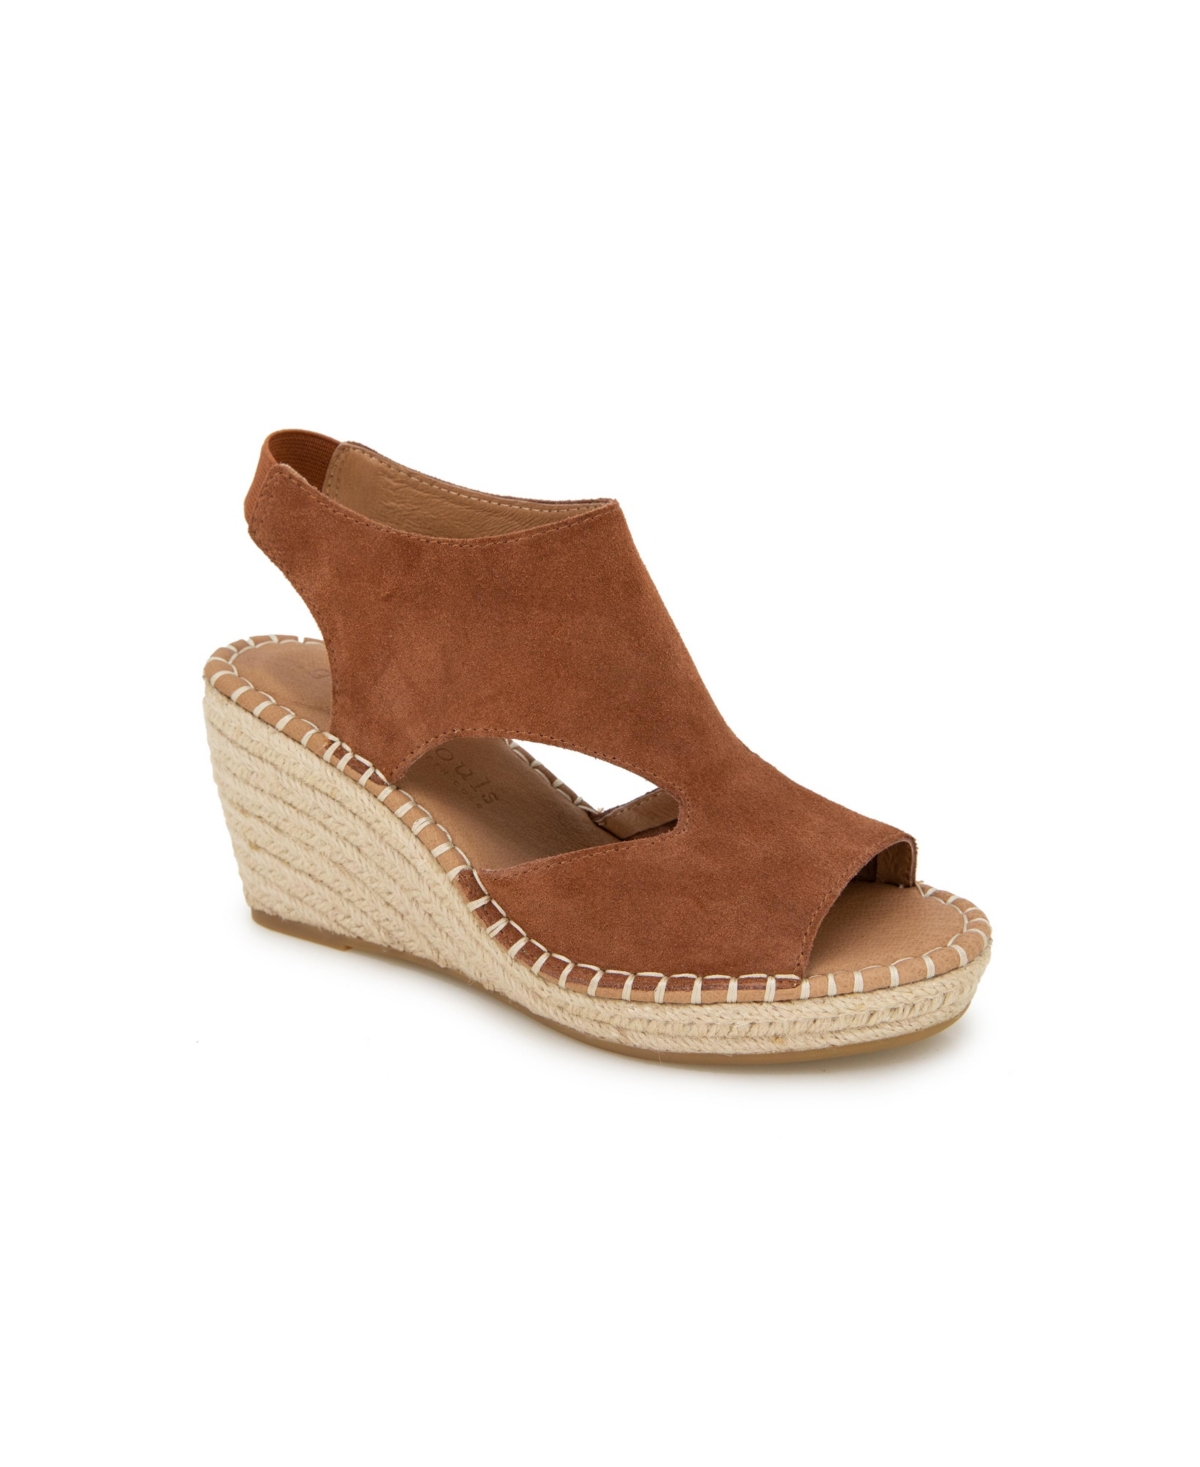 Women's Cody Pull-On Sandals - Luggage Suede